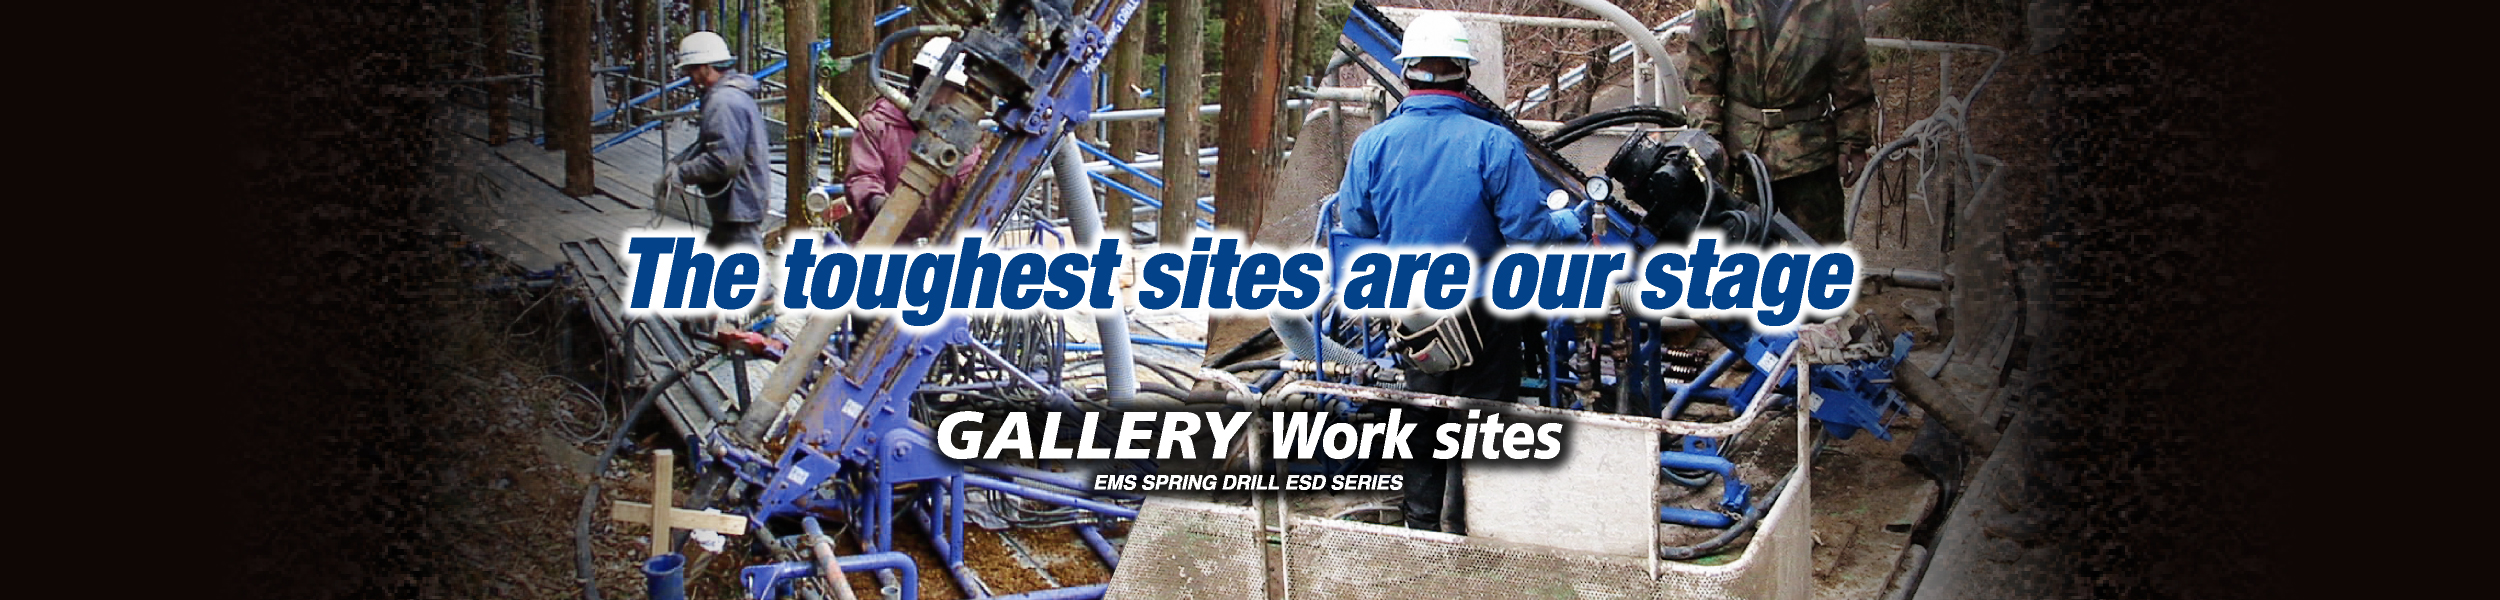 The toughest sites are our stage GALLERY Work sites 